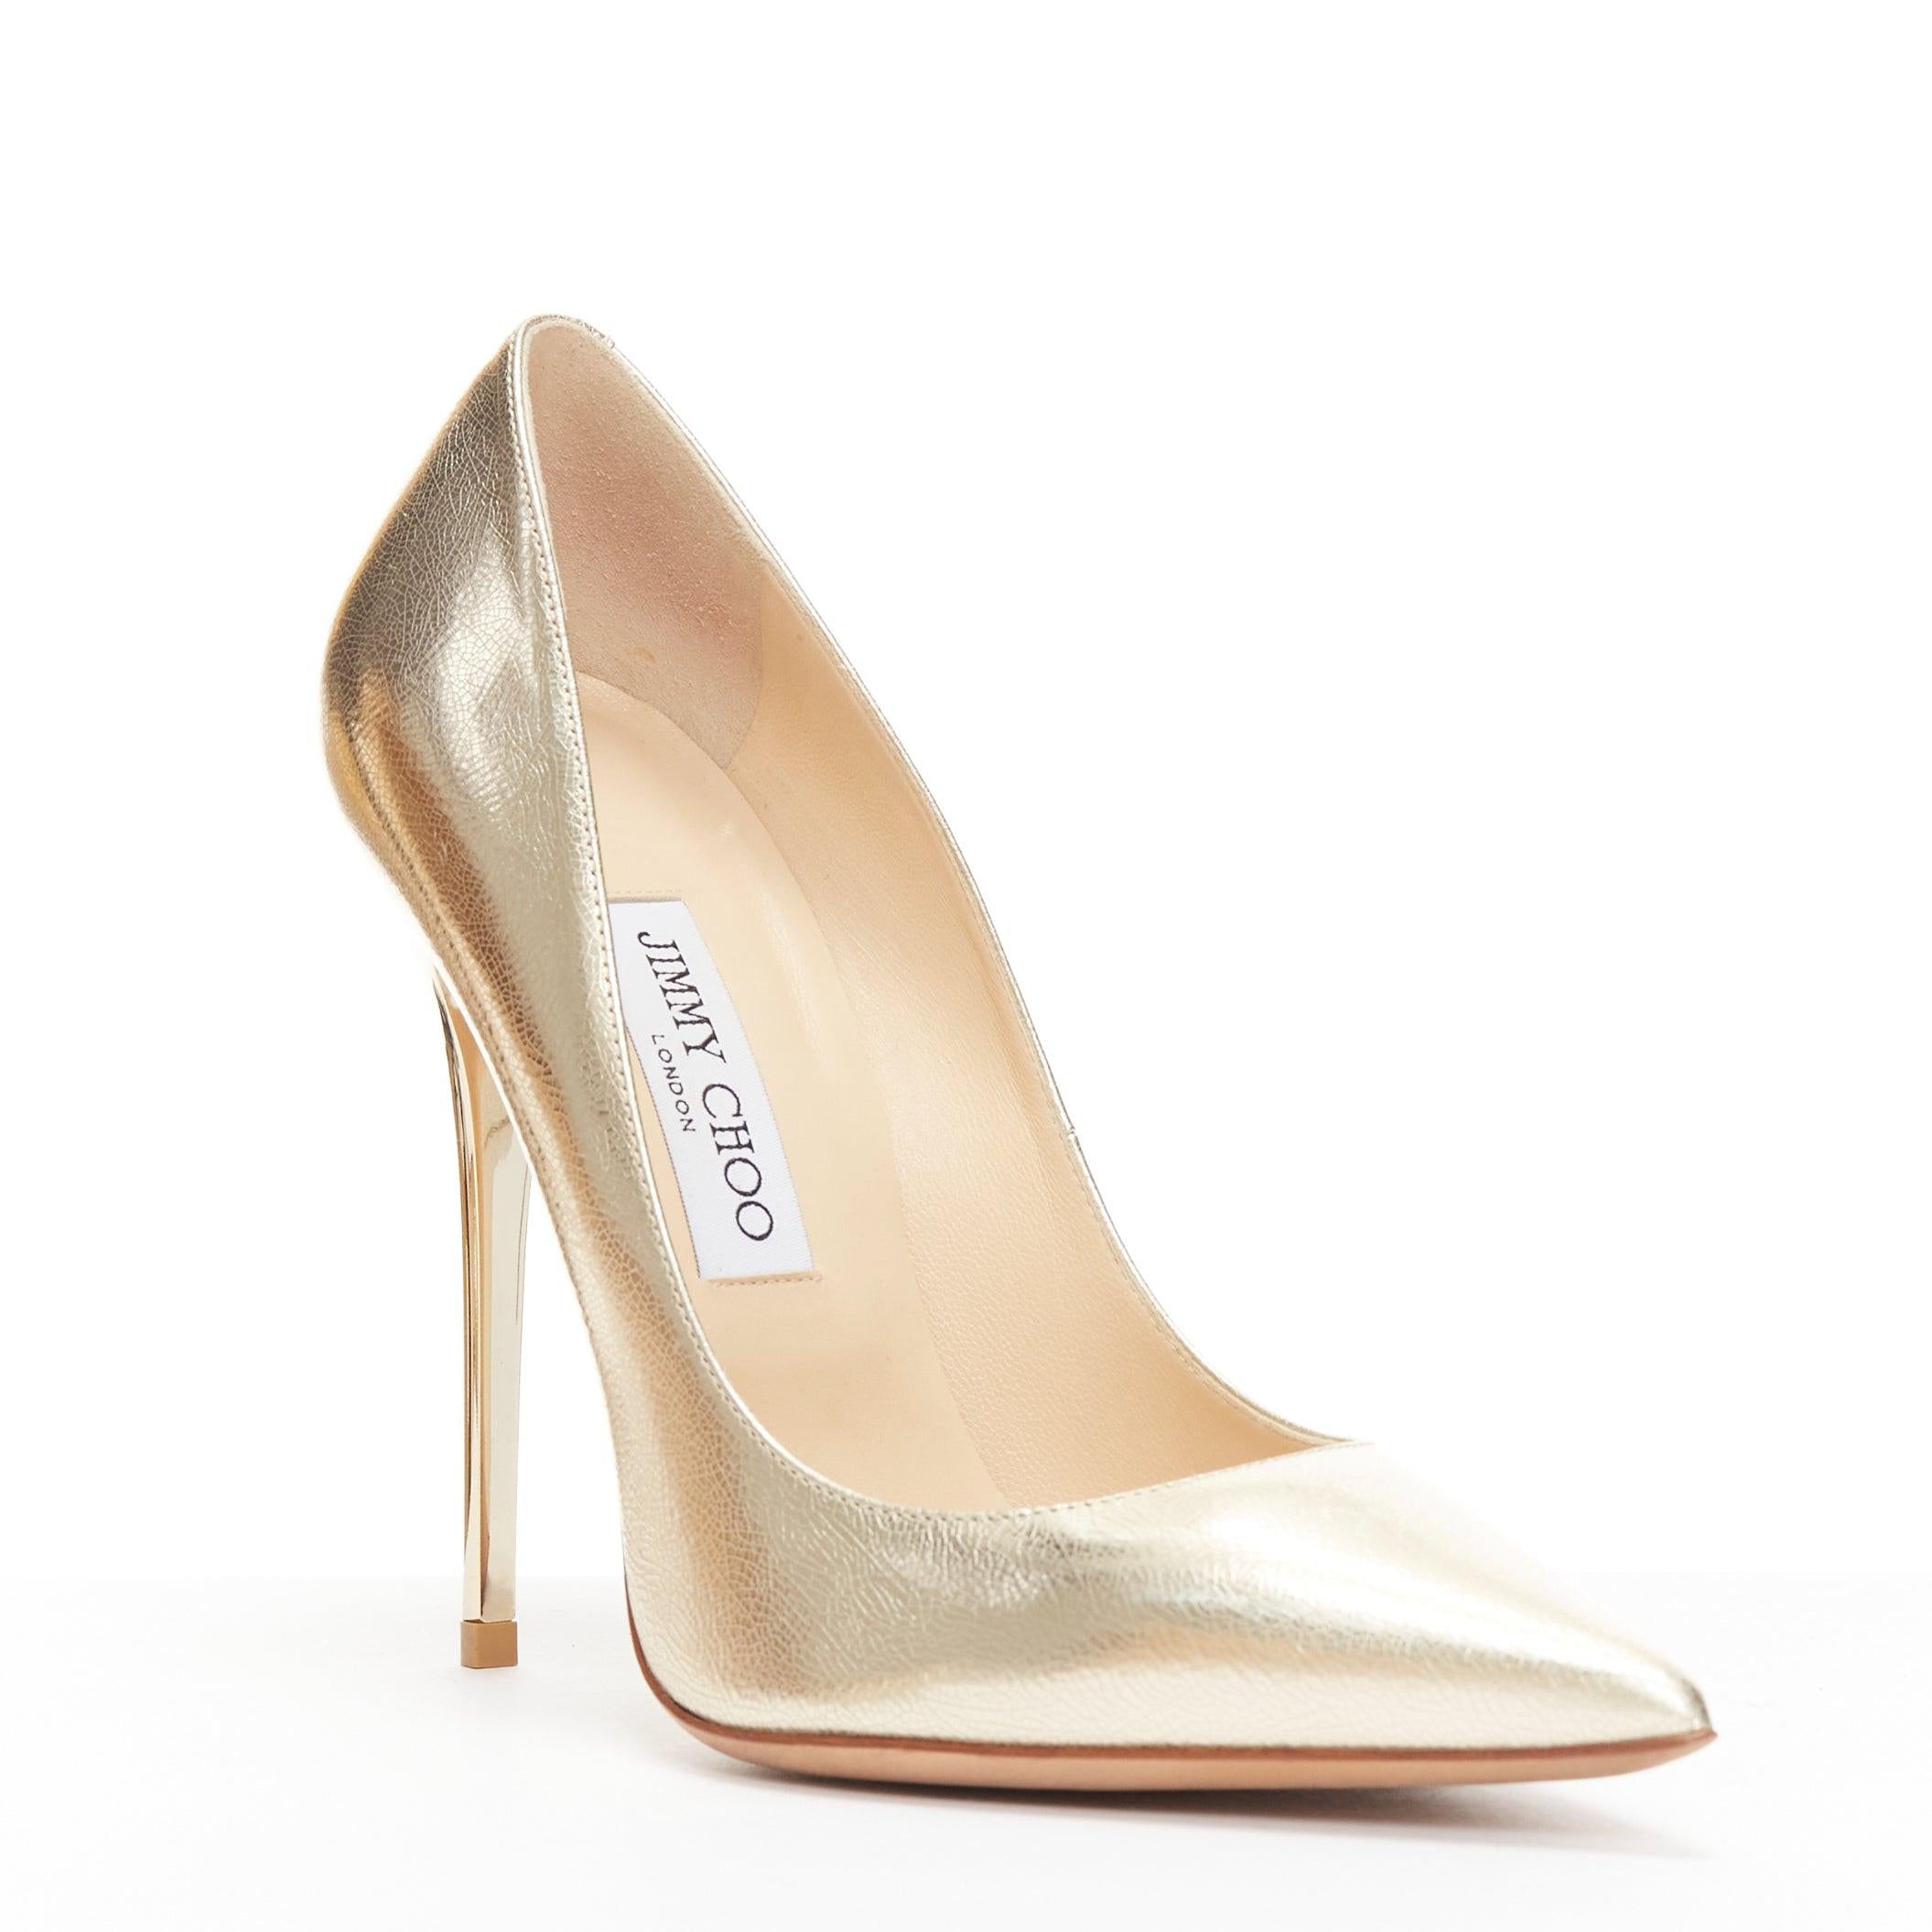 JIMMY CHOO Anouk gold metallic leather classic pointy toe stiletto pumps EU39
Reference: AAWC/A01168
Brand: Jimmy Choo
Model: Anouk
Material: Leather
Color: Gold
Pattern: Solid
Closure: Slip On
Lining: Nude Leather
Extra Details: Stiletto